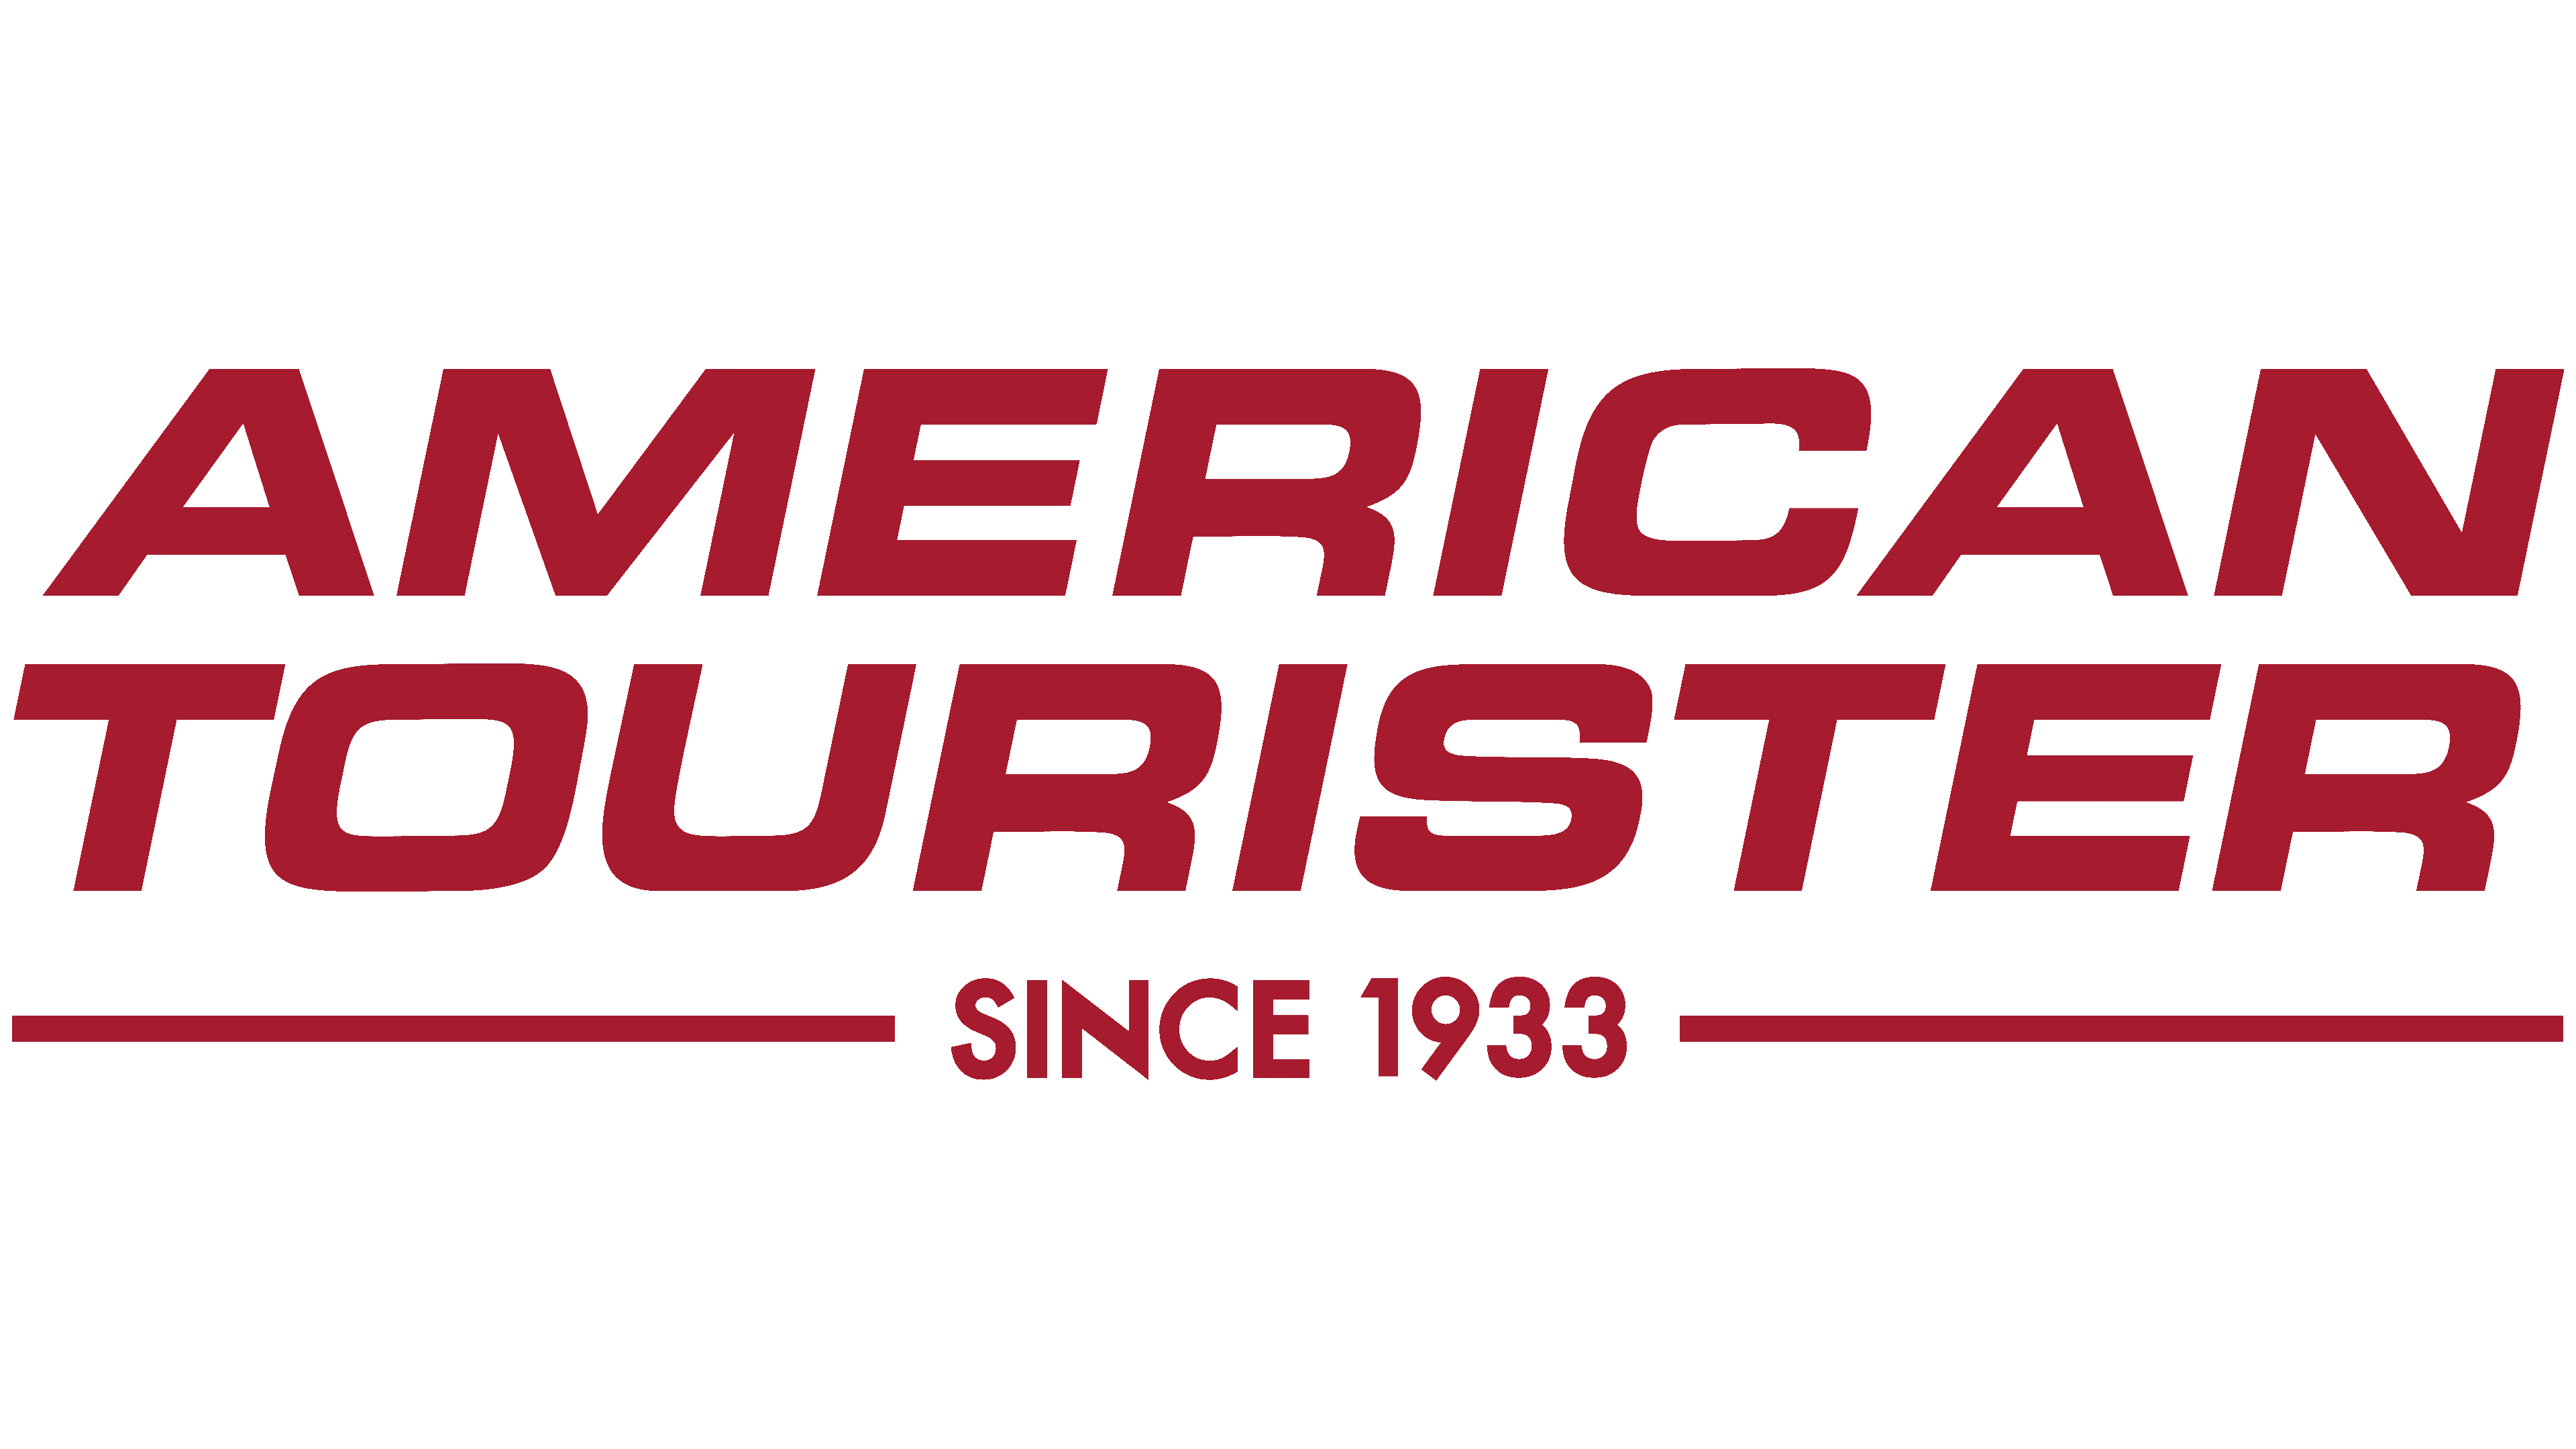 American Tourister Coupons